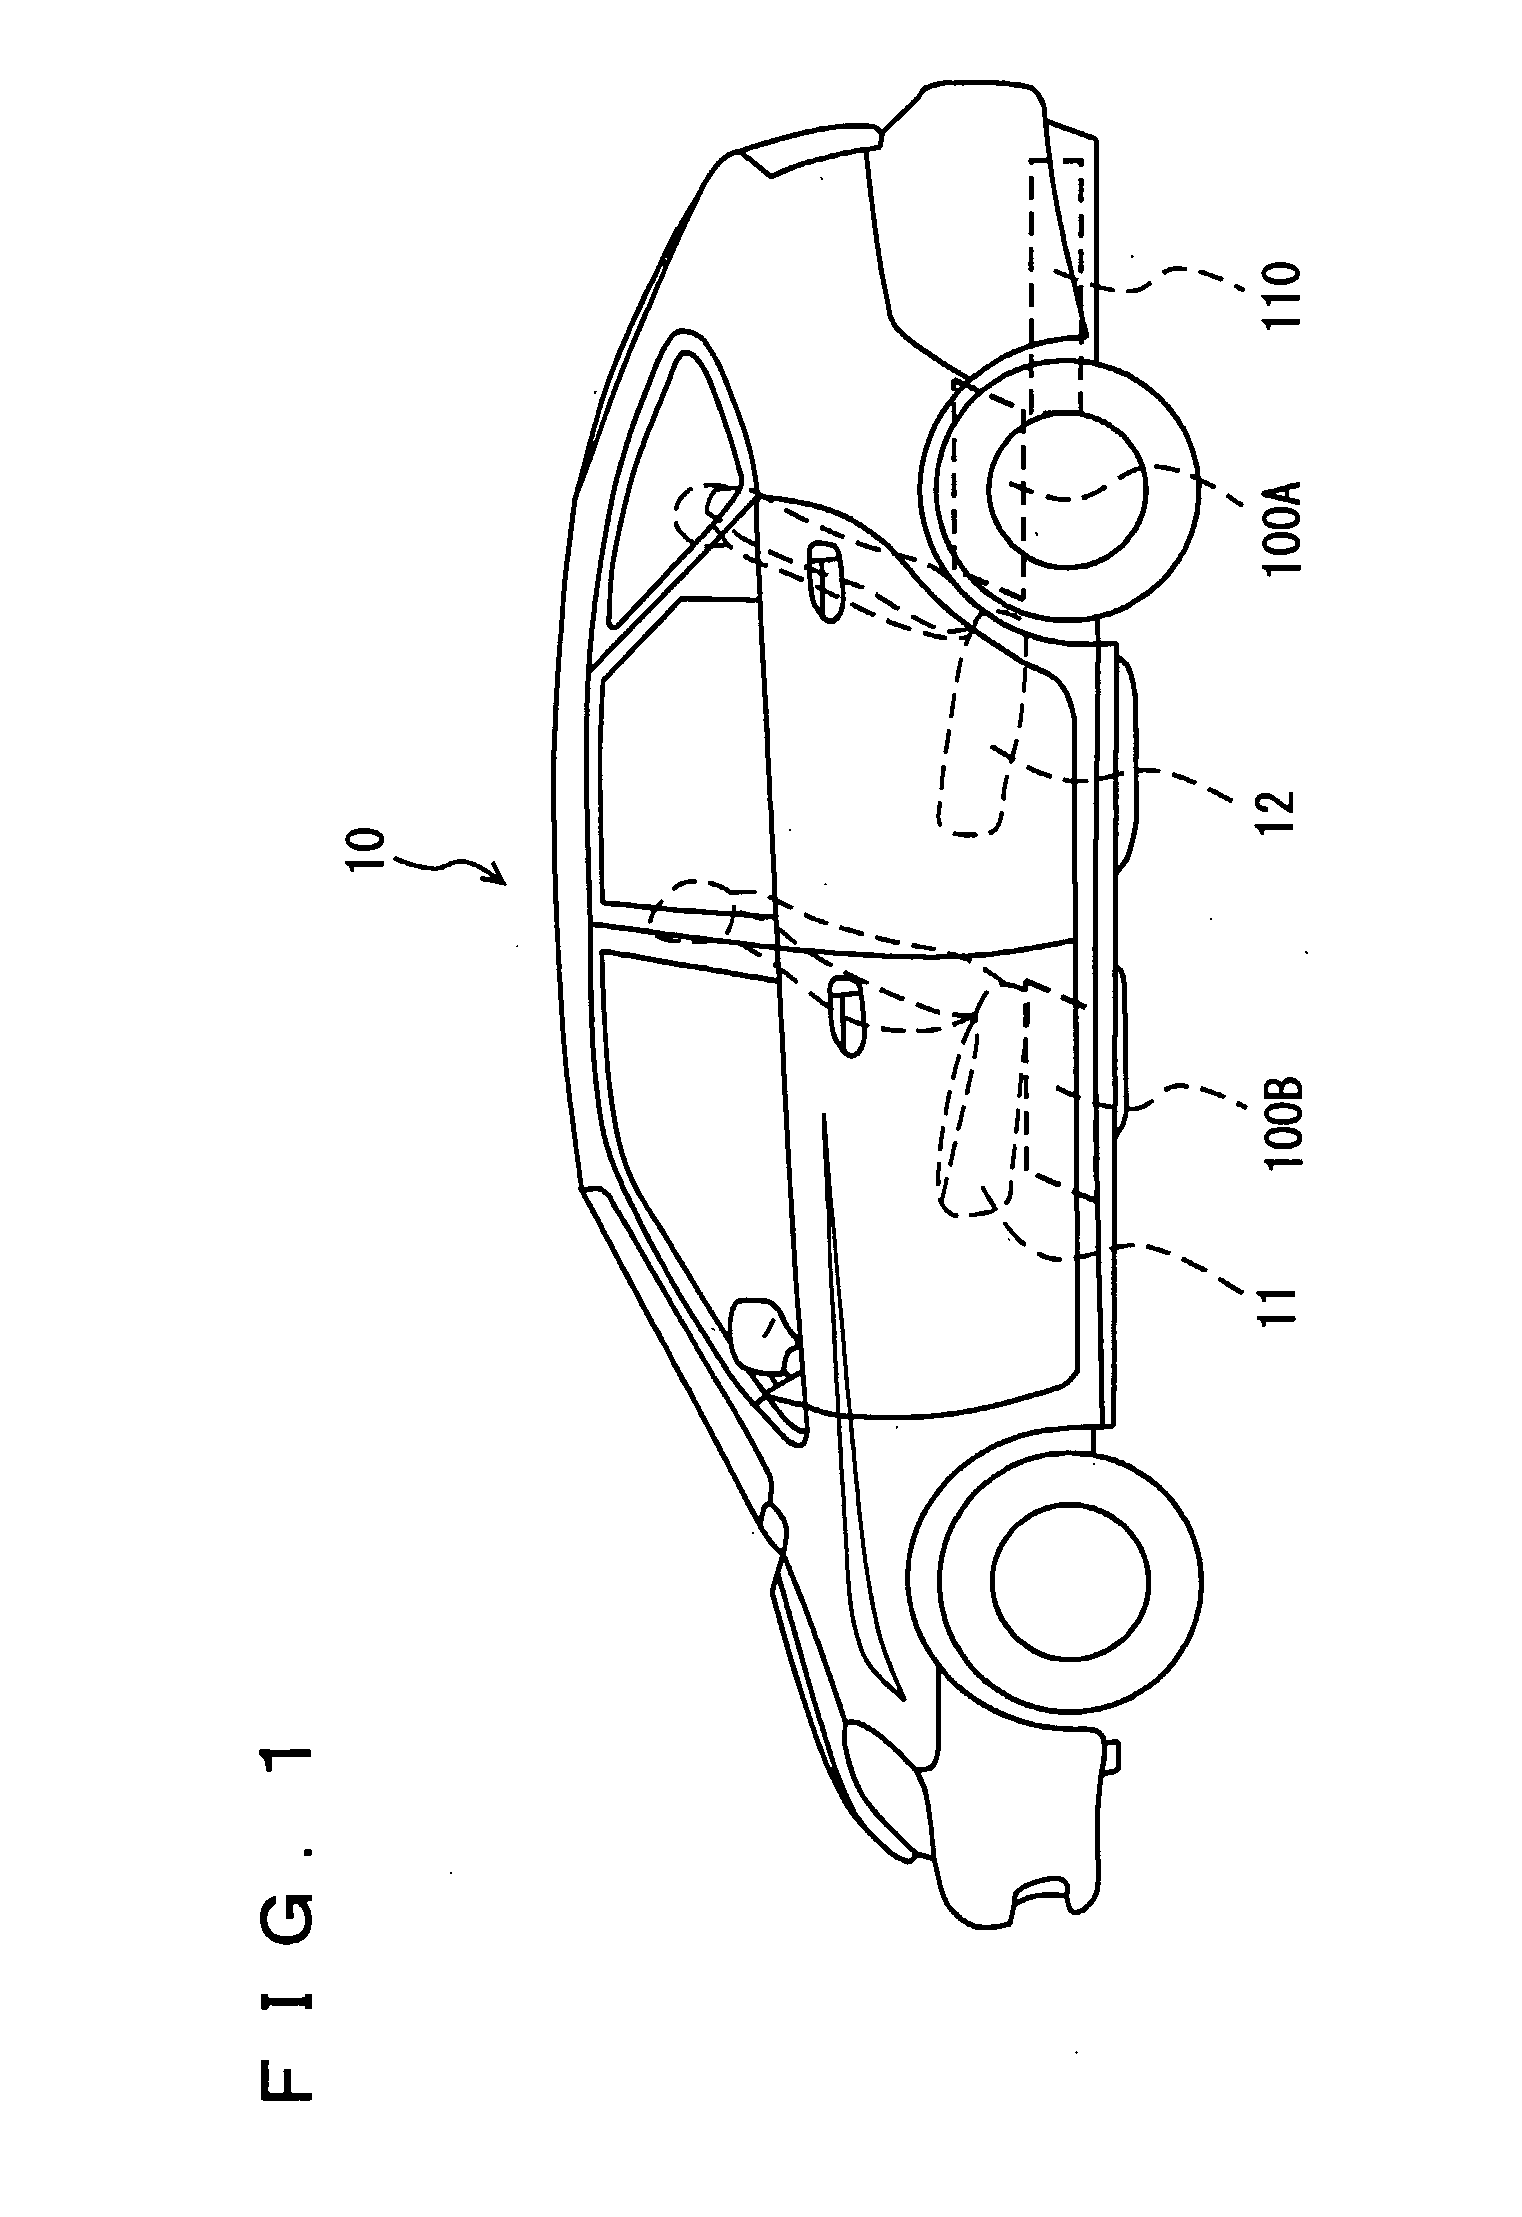 Mounting Structure of Electrical Equipment